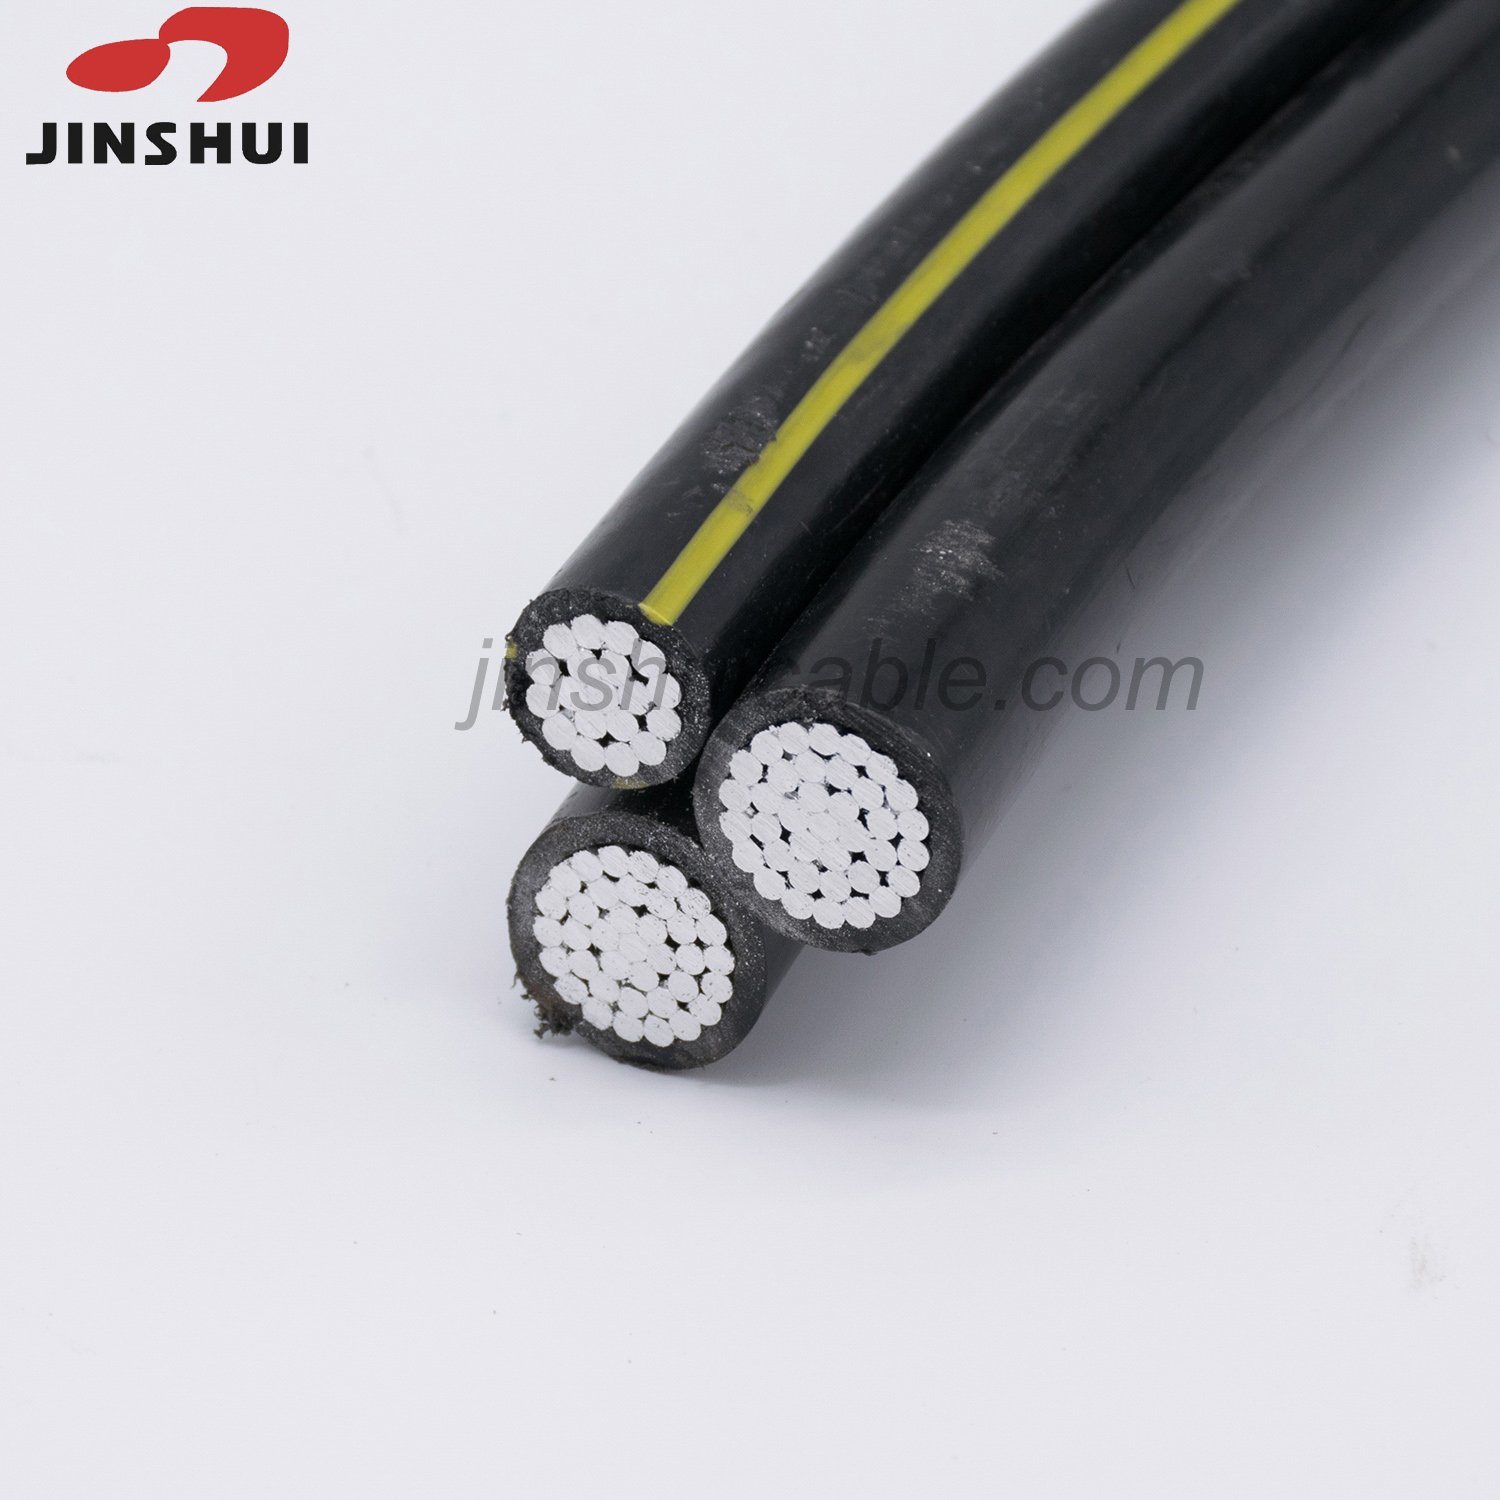 0.6/1kv Low Voltage Aerial Bundled Cable Voltage Overhead Electric Cable